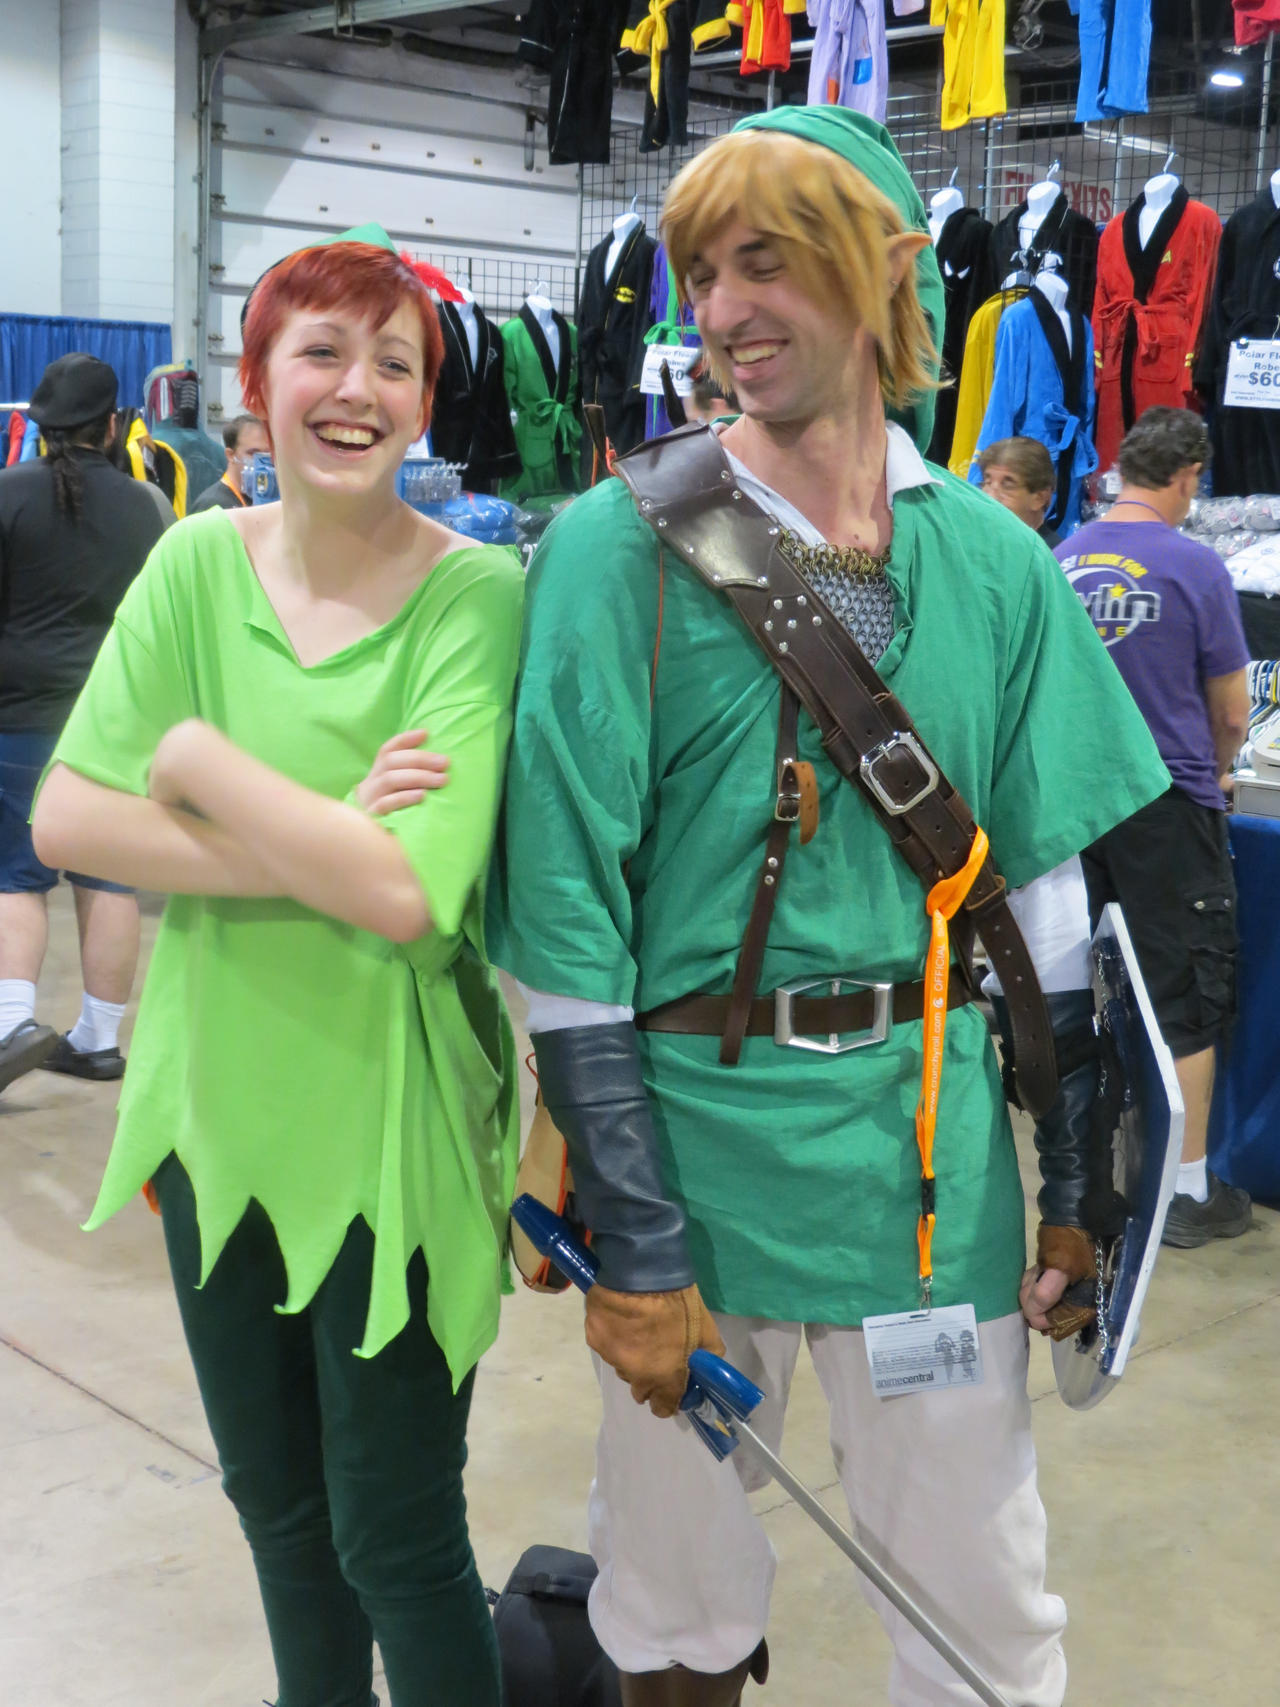 Link and Peter Pan 4 by scoldingspirit84 on DeviantArt